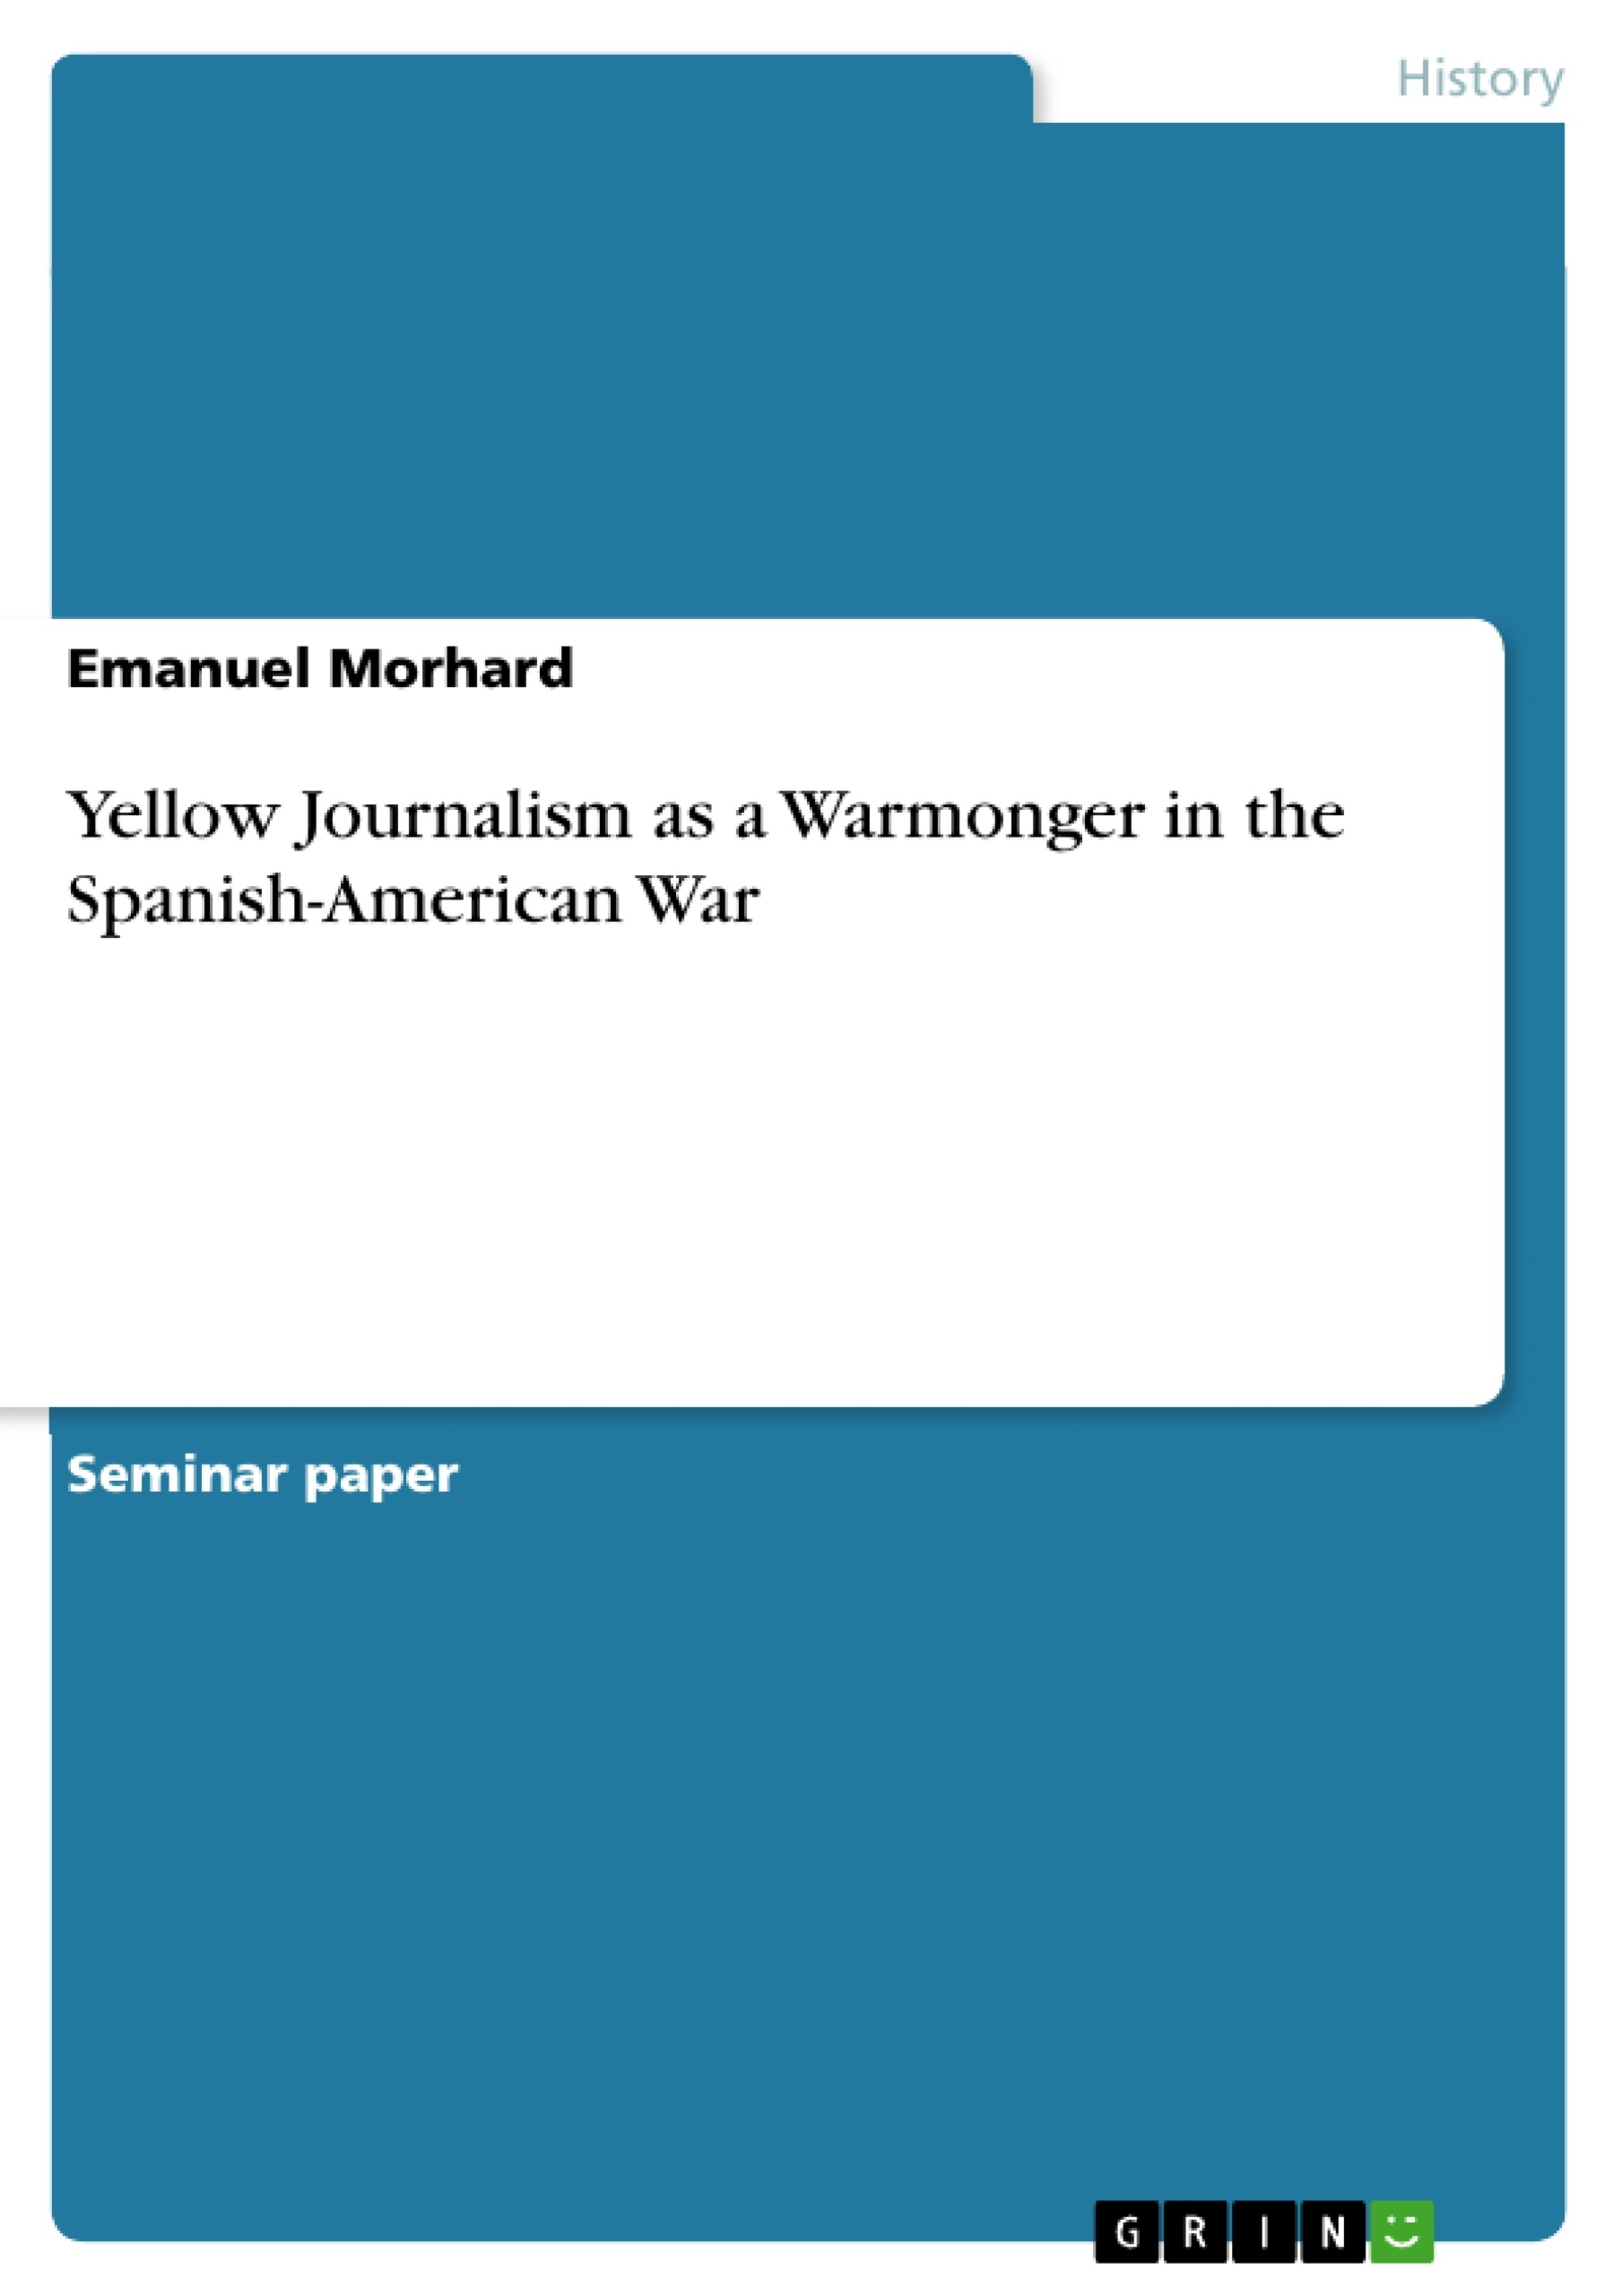 Título: Yellow Journalism as a Warmonger in the Spanish-American War